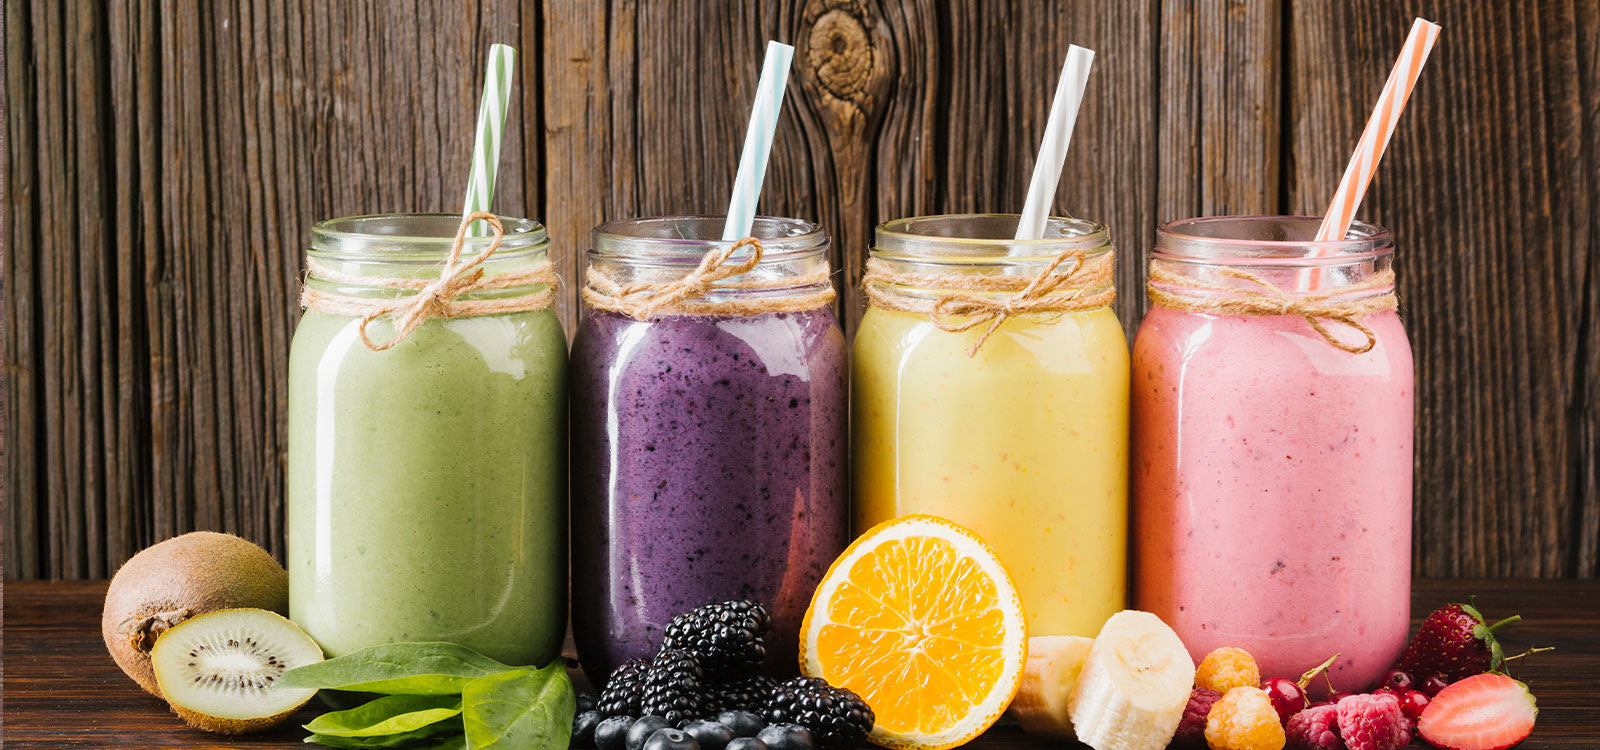 JUICES & SMOOTHIES